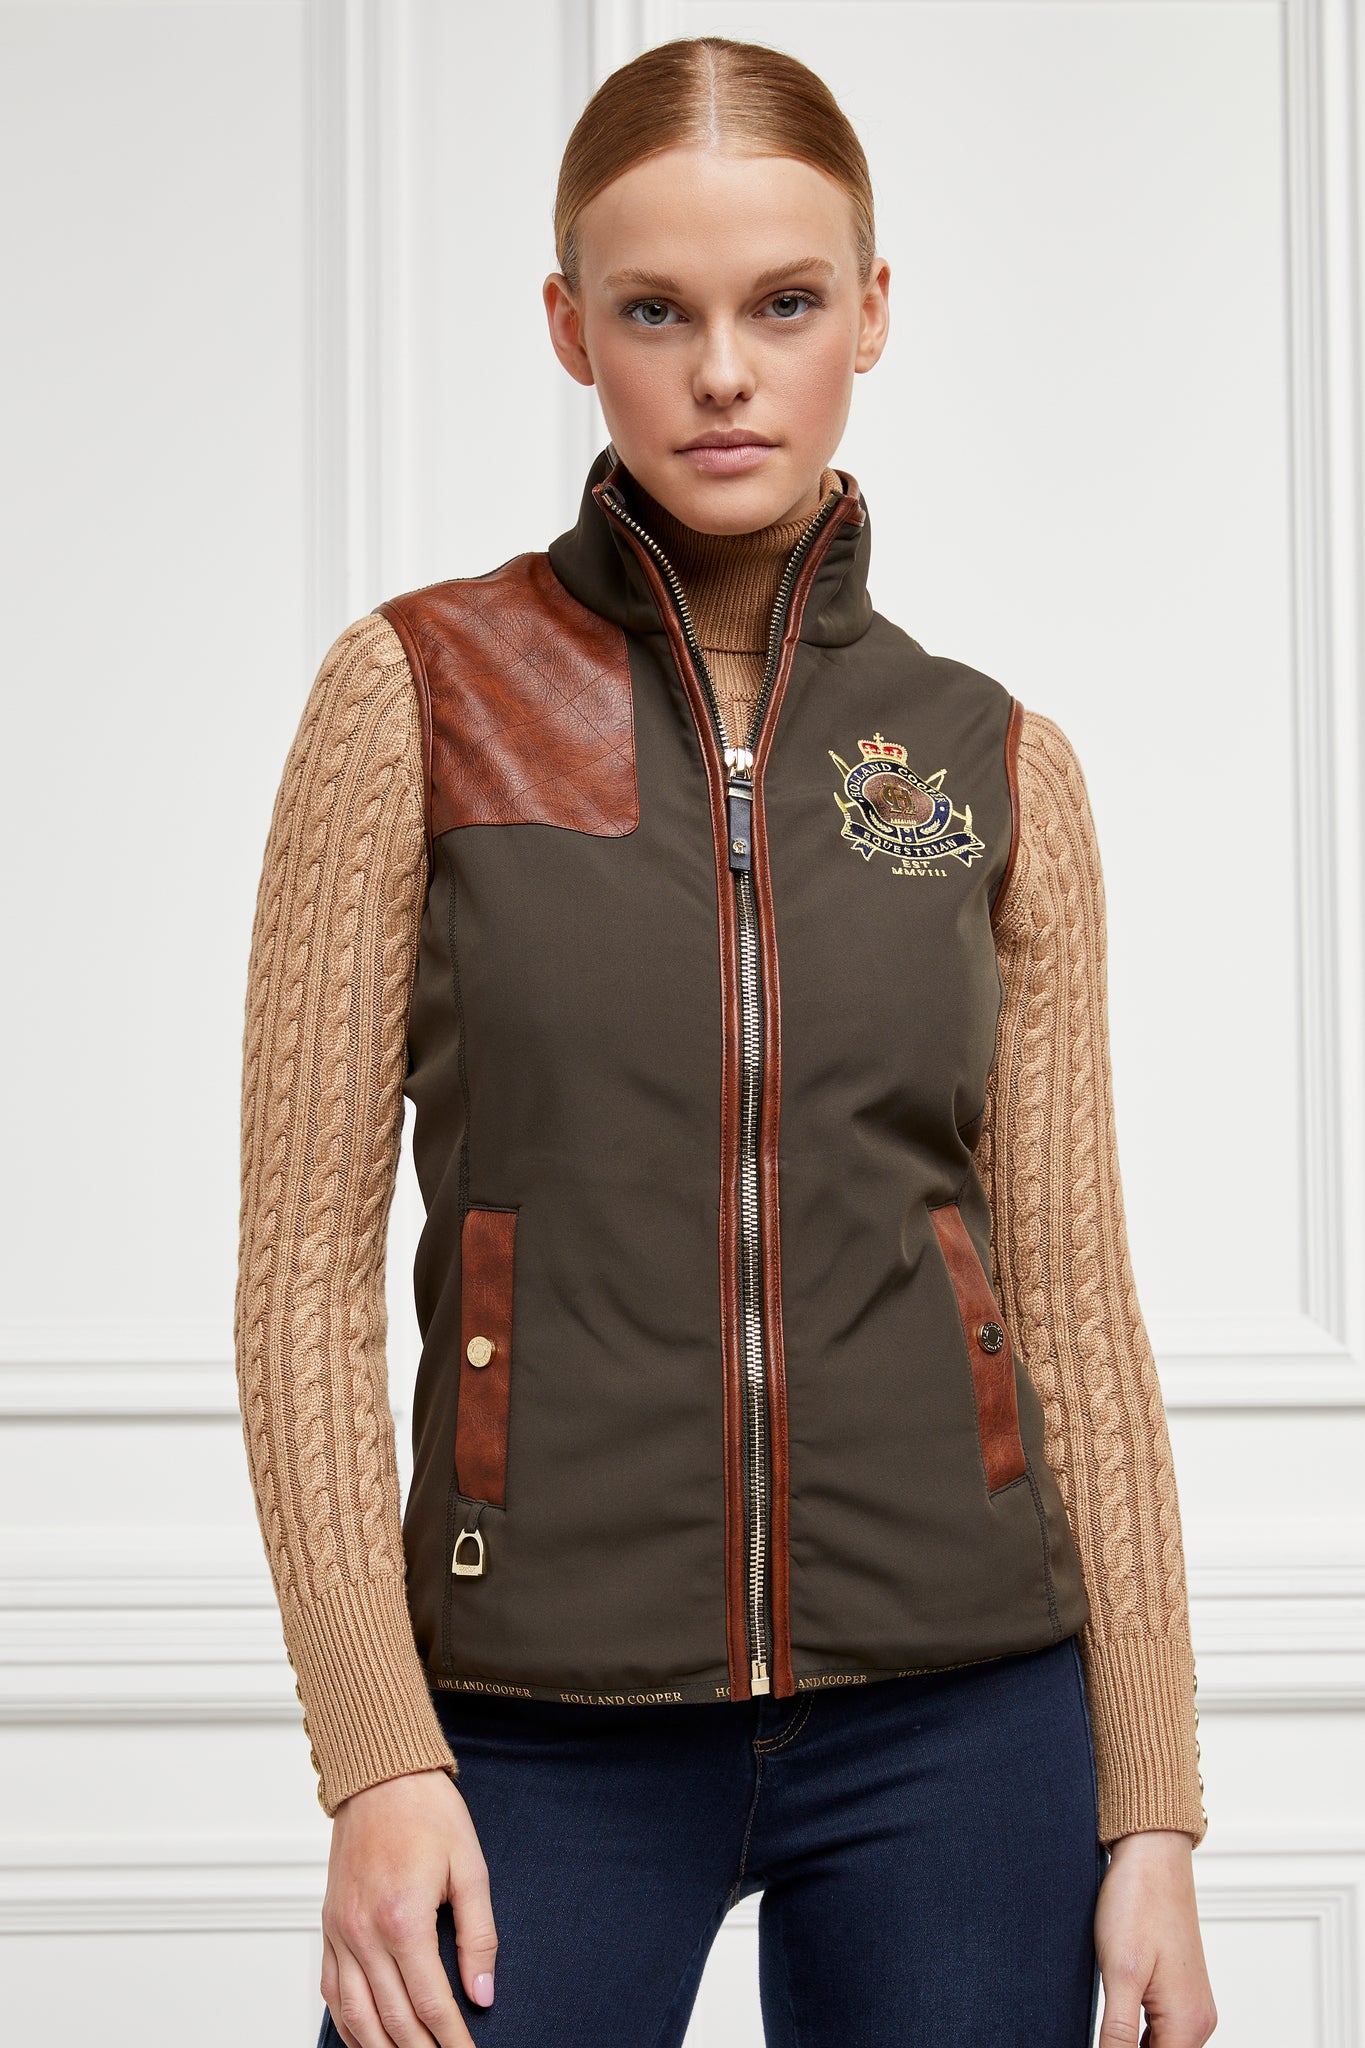 womens khaki gilet with dark brown leather seams along the arm holes pockets and down the zip with a gun patch on the shoulder and an embroidered logo worn with a beige knitted jumper and indigo jeans